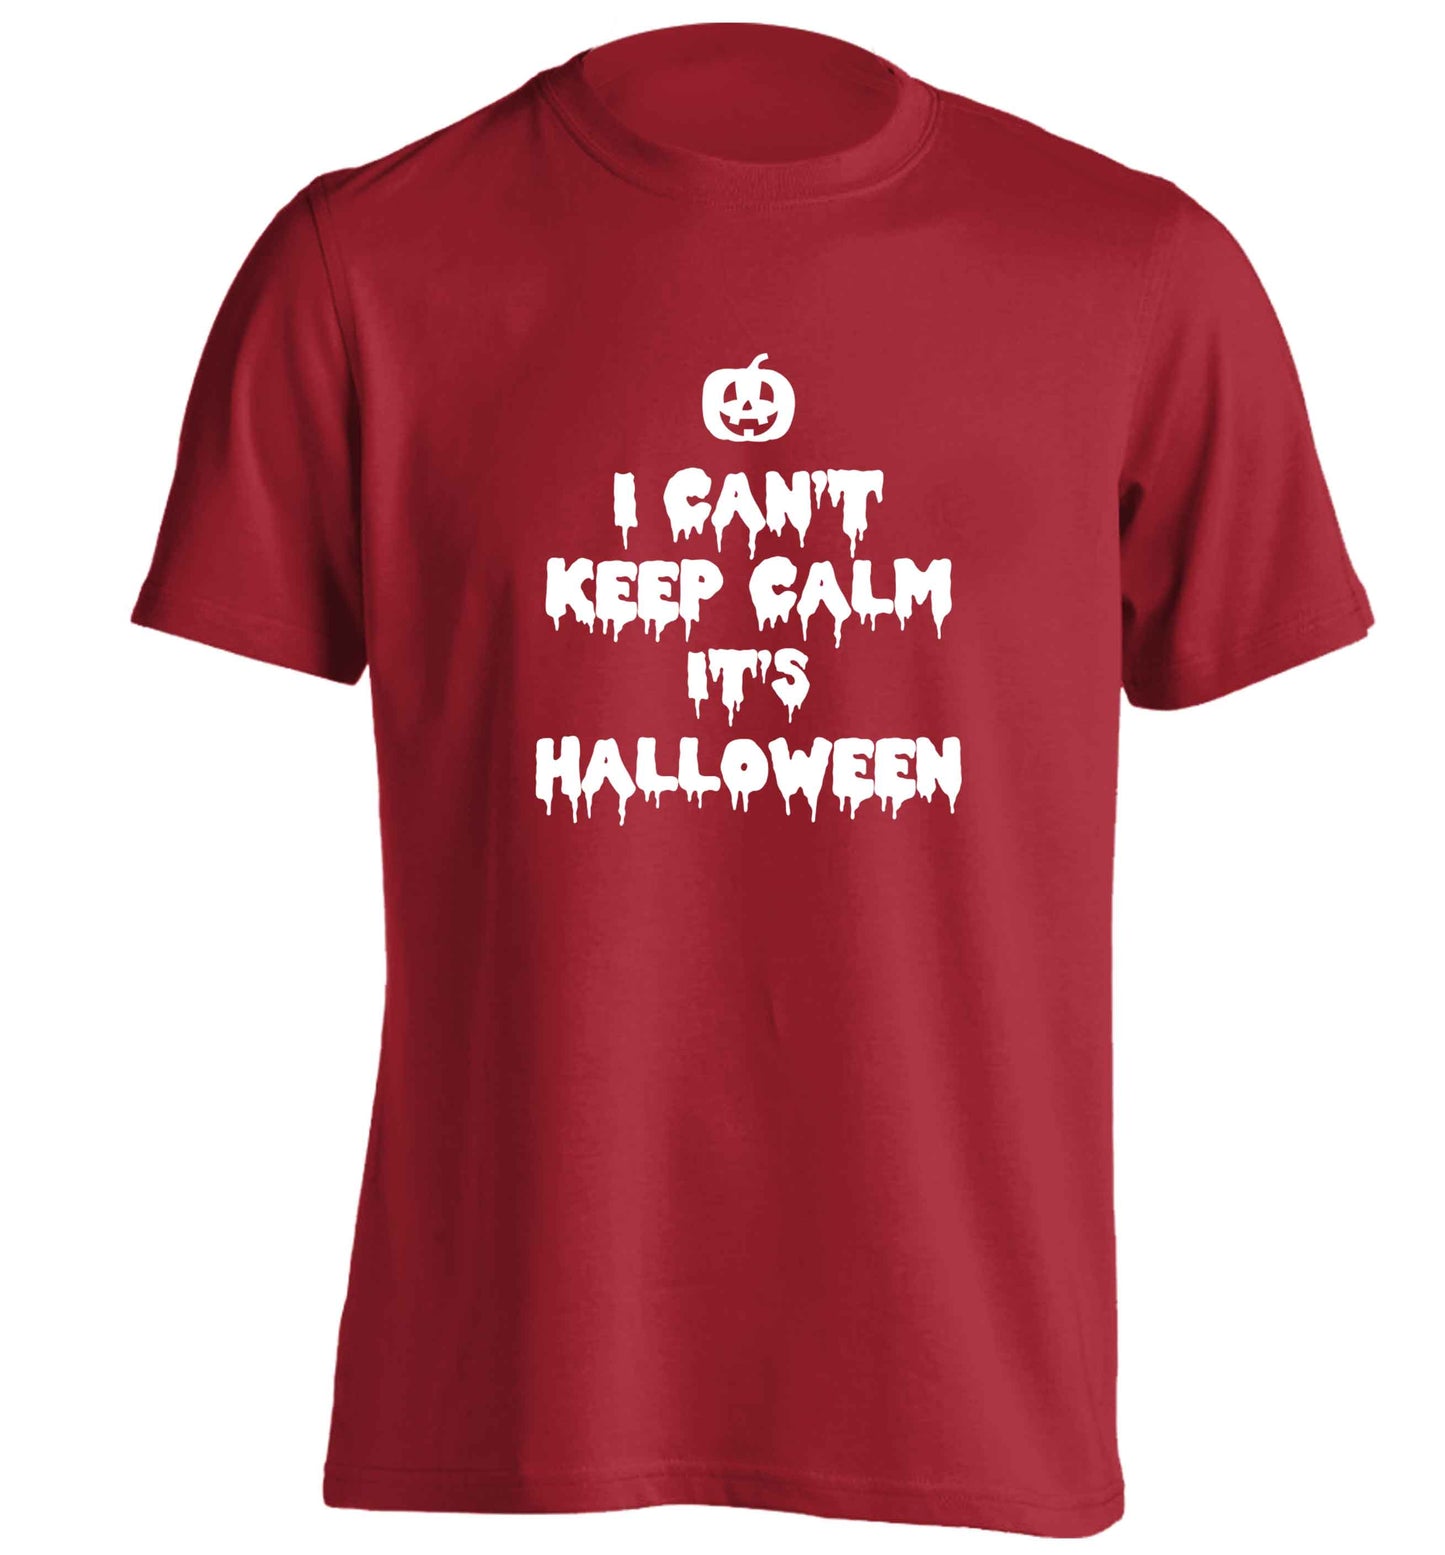 I can't keep calm it's halloween adults unisex red Tshirt 2XL